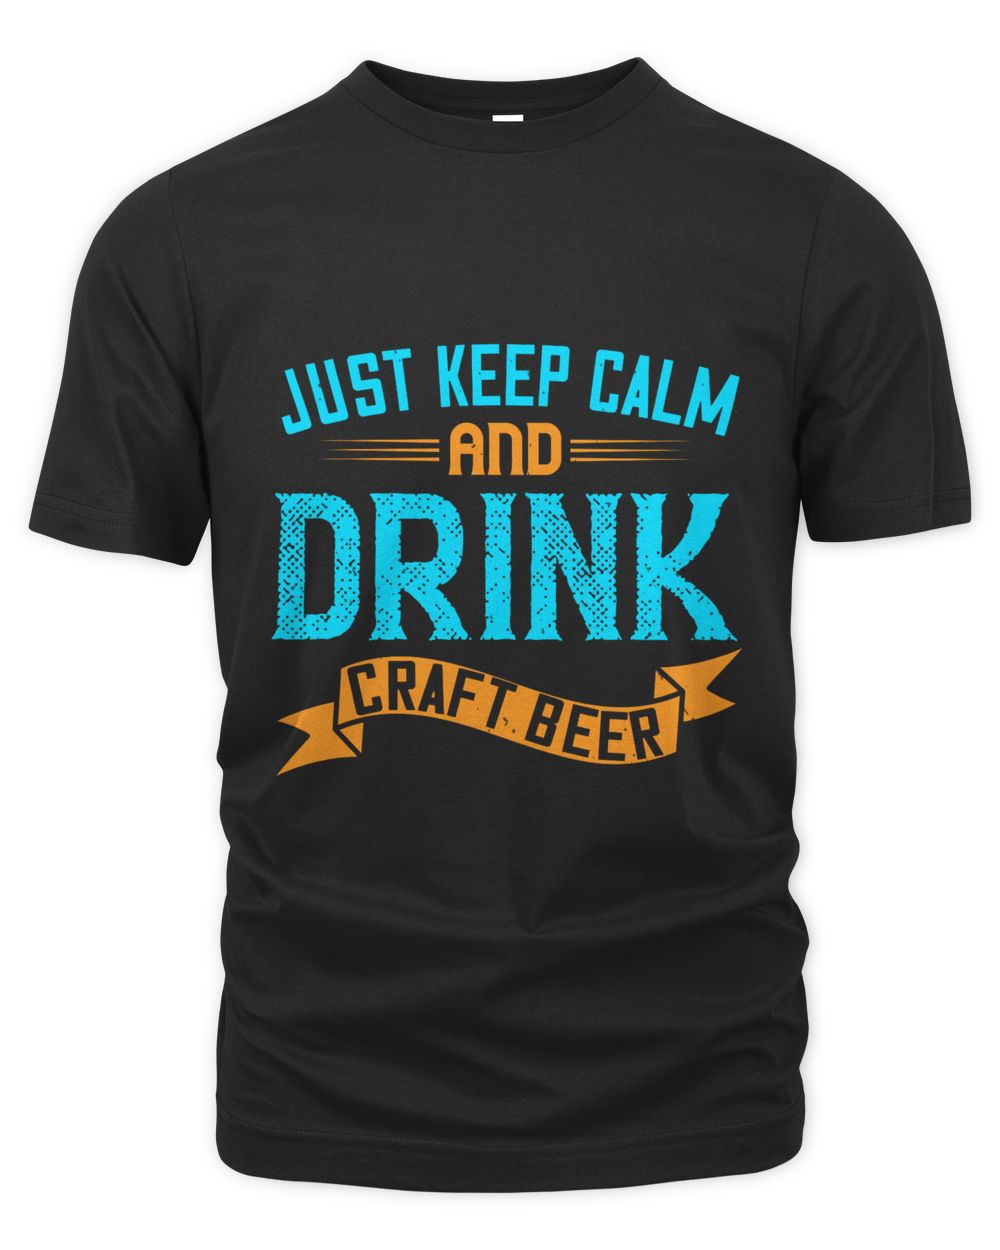 Just Keep Calm And Drink Craft Beer Beer Shirt For Beer Lover With Free Shipping, Great Gift For Fathers Day Men's Premium Tshirt black 